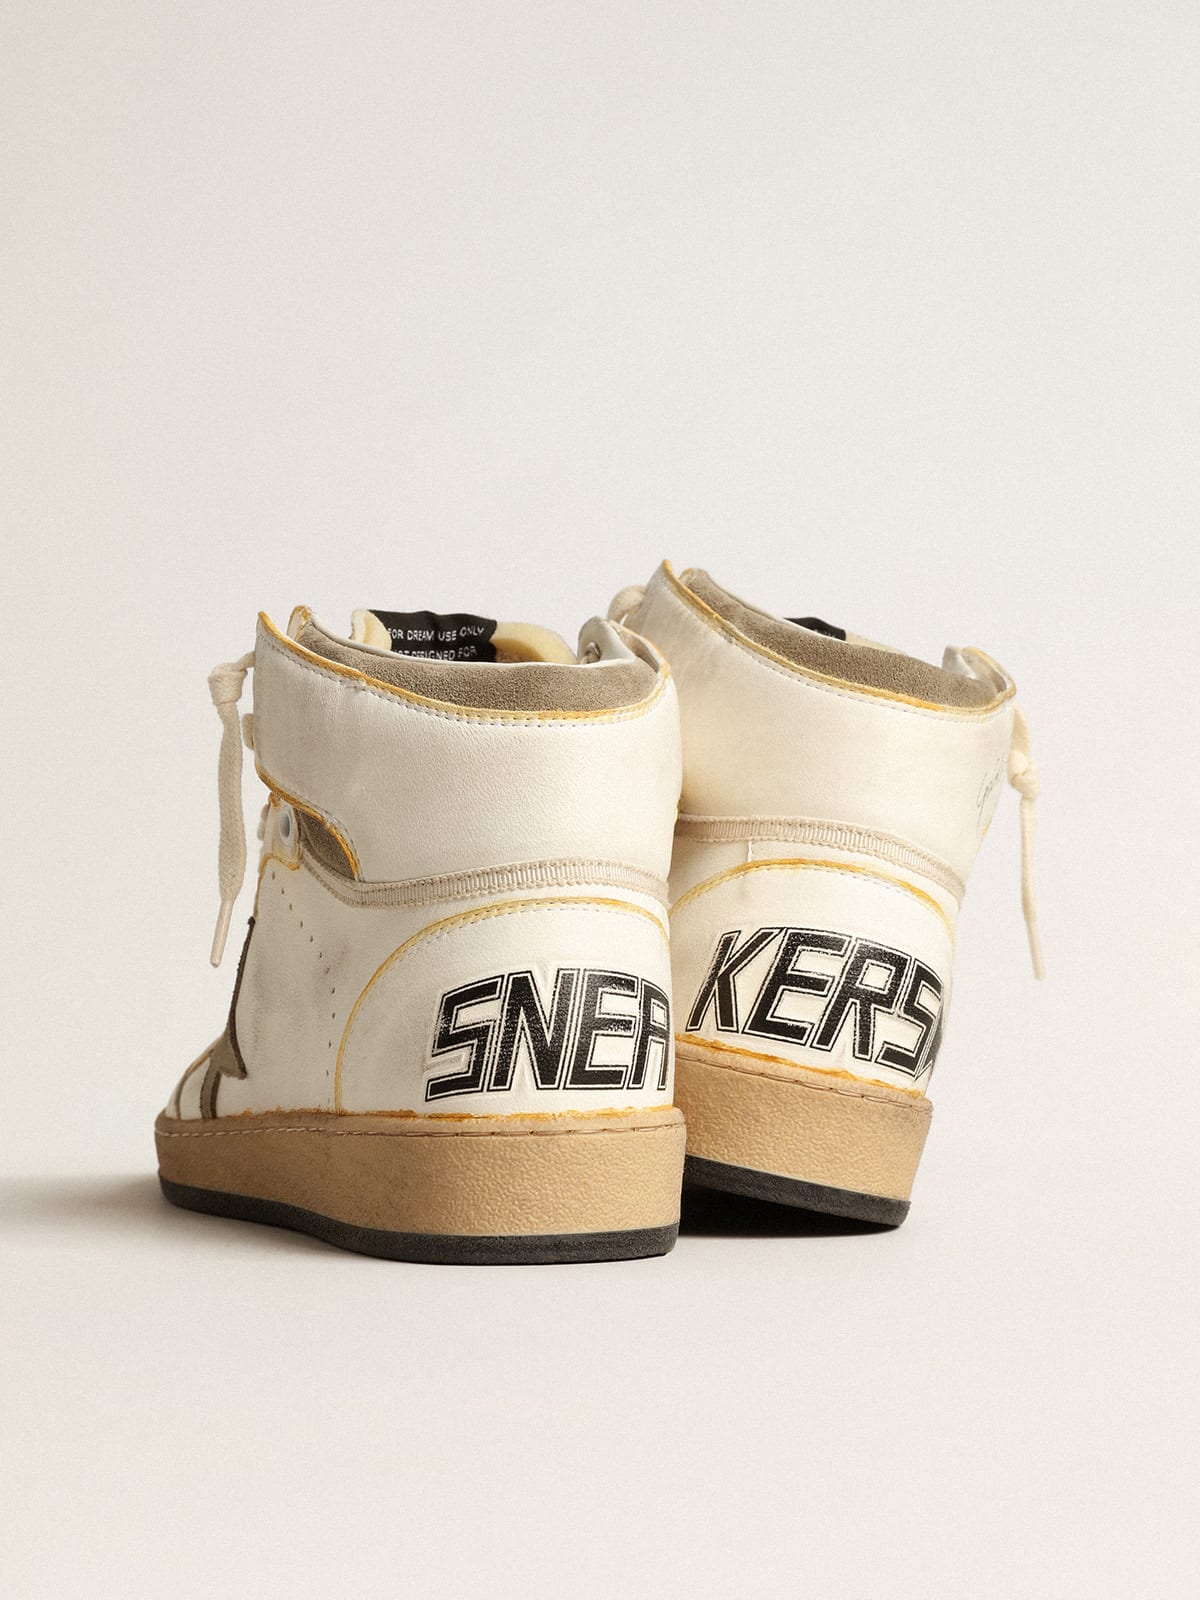 Golden Goose - Women’s Sky-Star in white nappa leather with dove-gray suede star in 